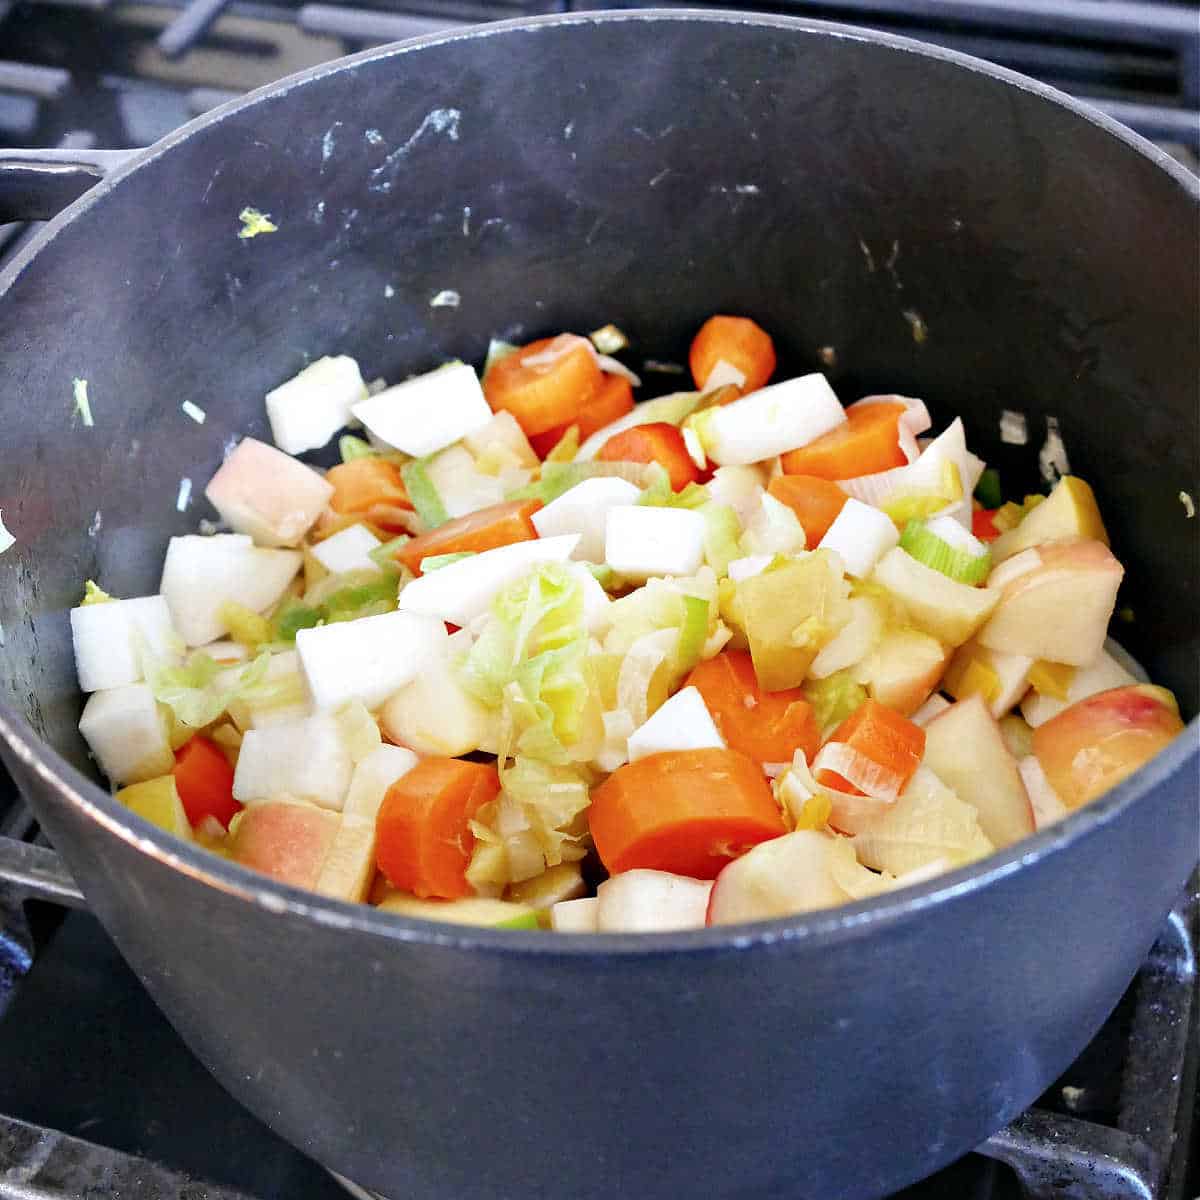 leeks, turnips, carrots, and apples cooking in a soup pot on a stove